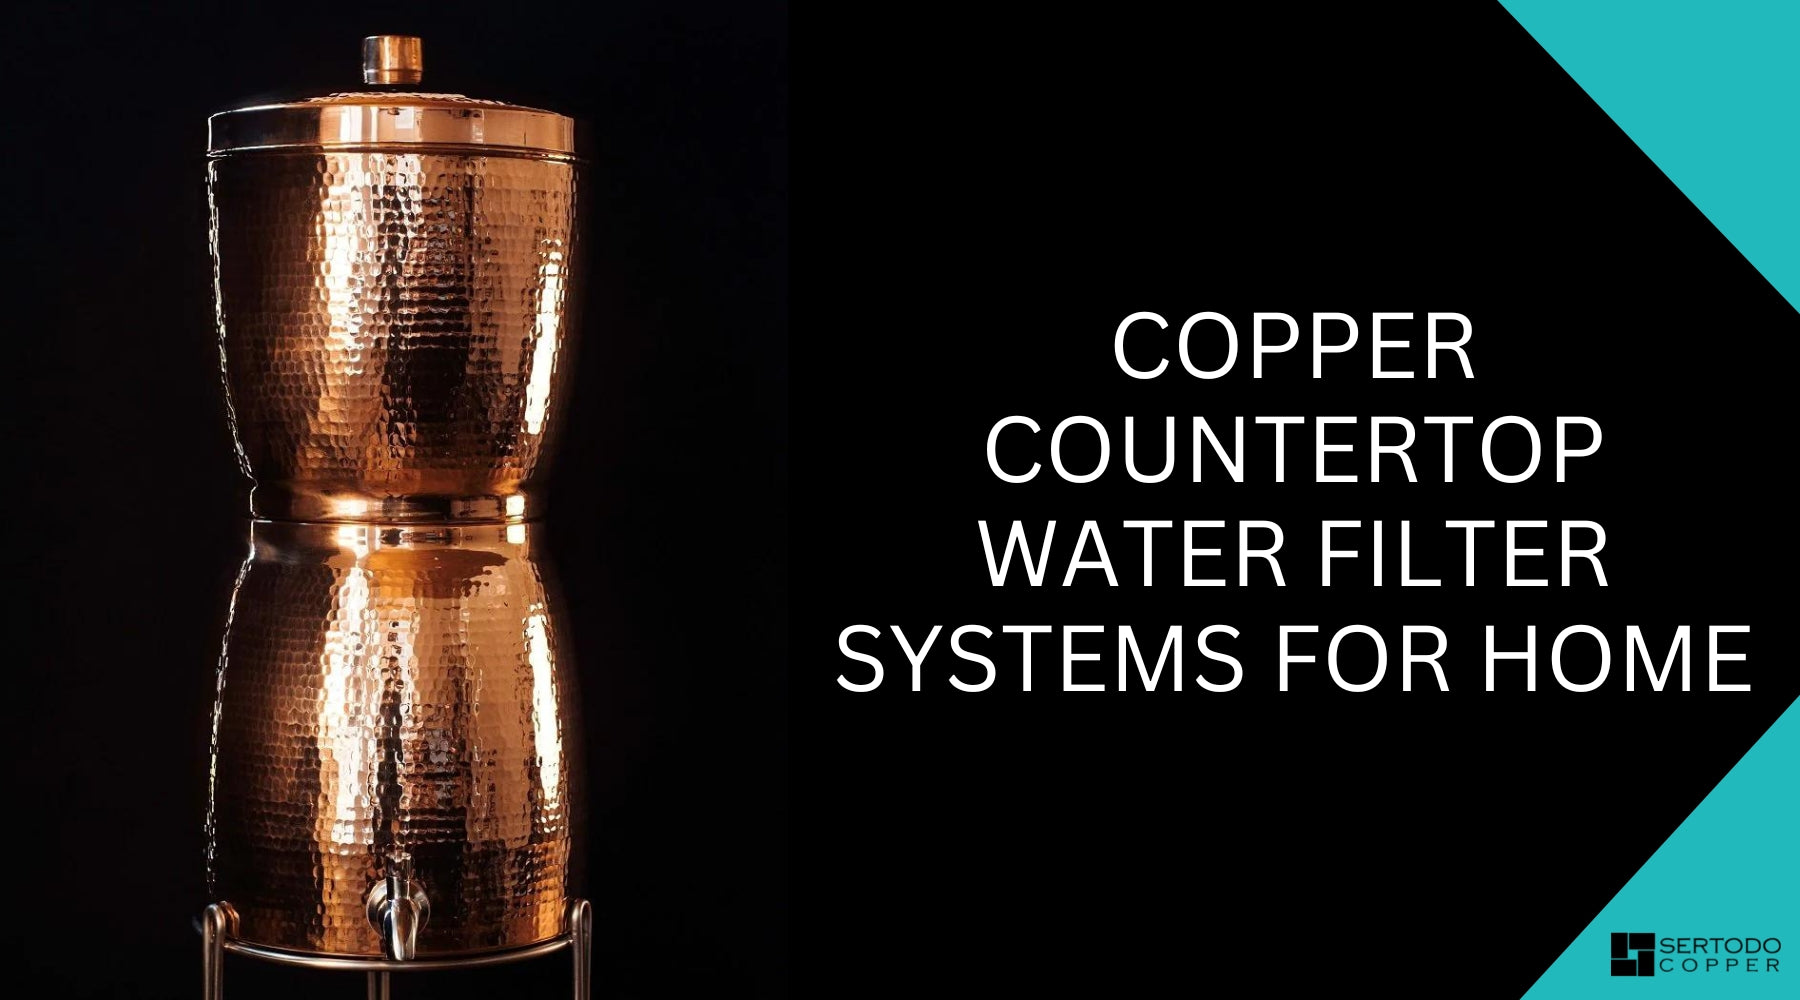 Copper Countertop Water Filter Systems for Home